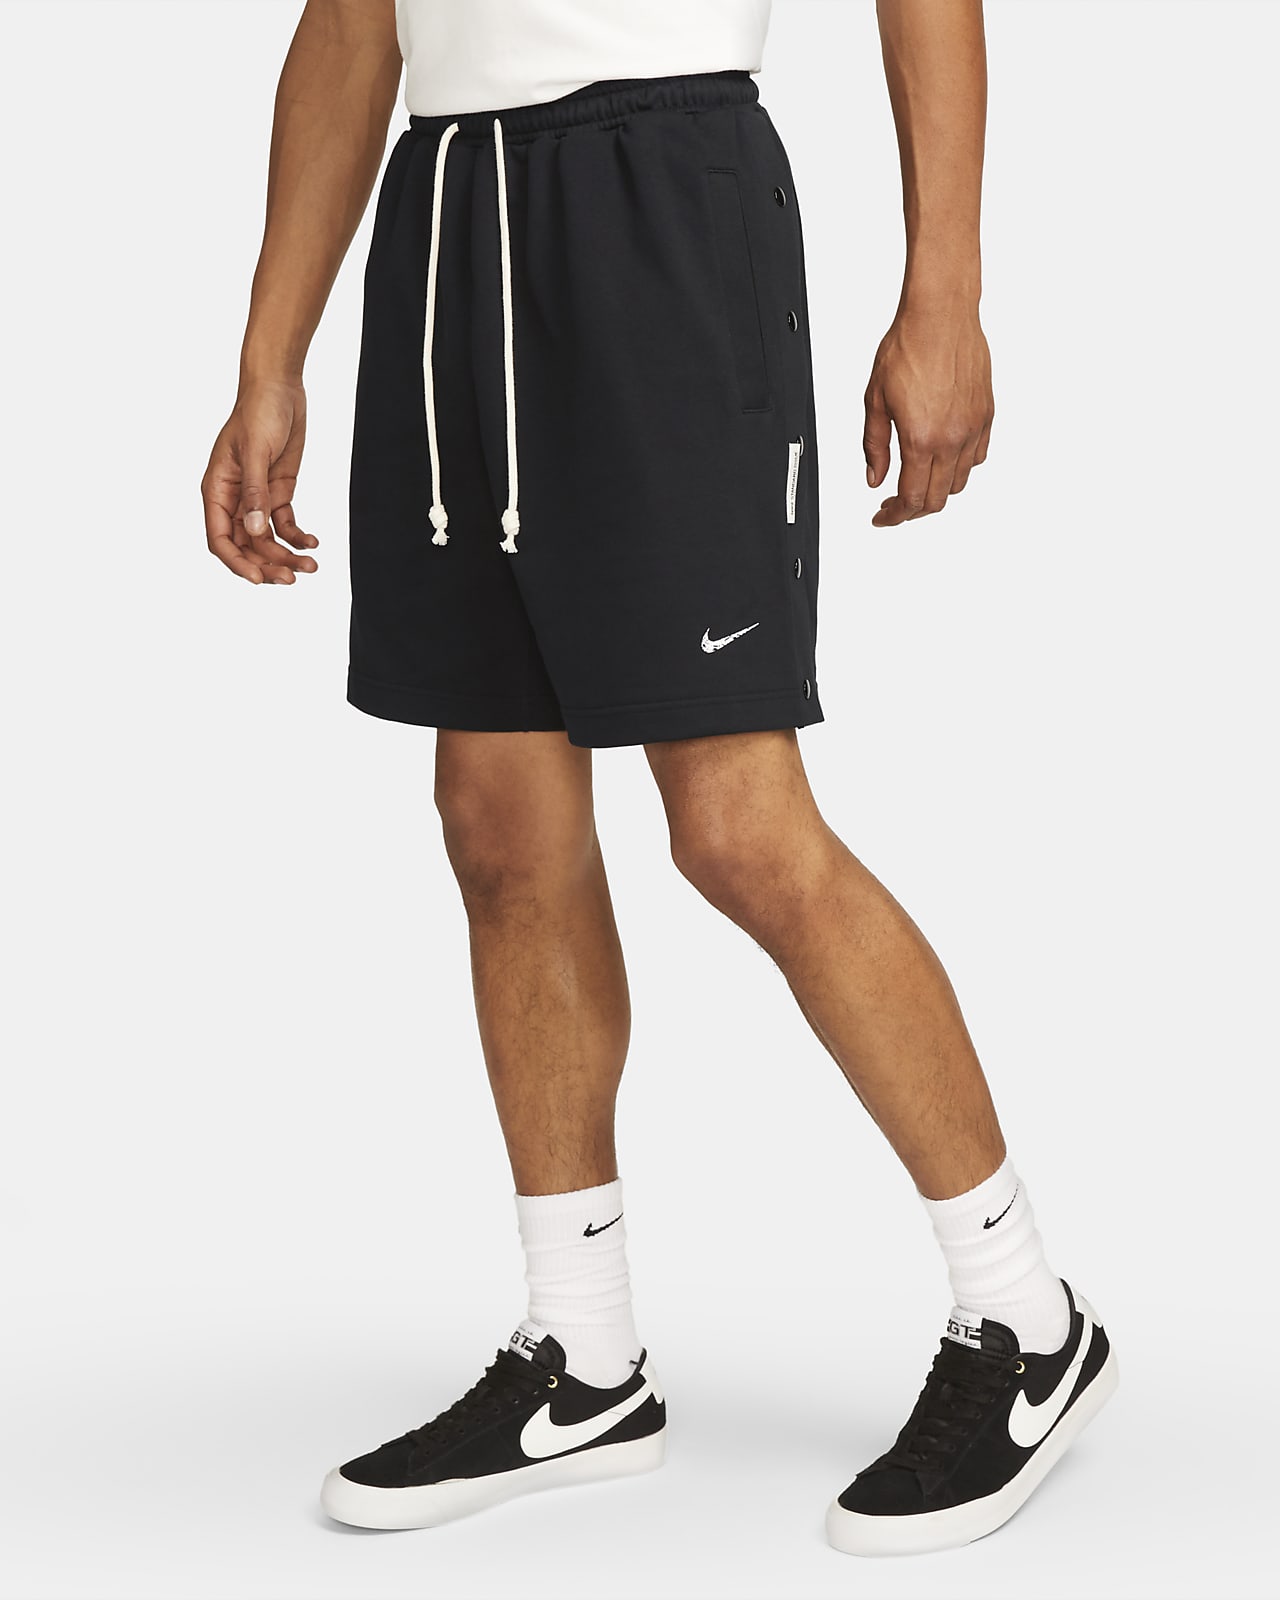 Nike Dri-FIT Standard Issue Men's 8 French Terry Basketball Shorts.